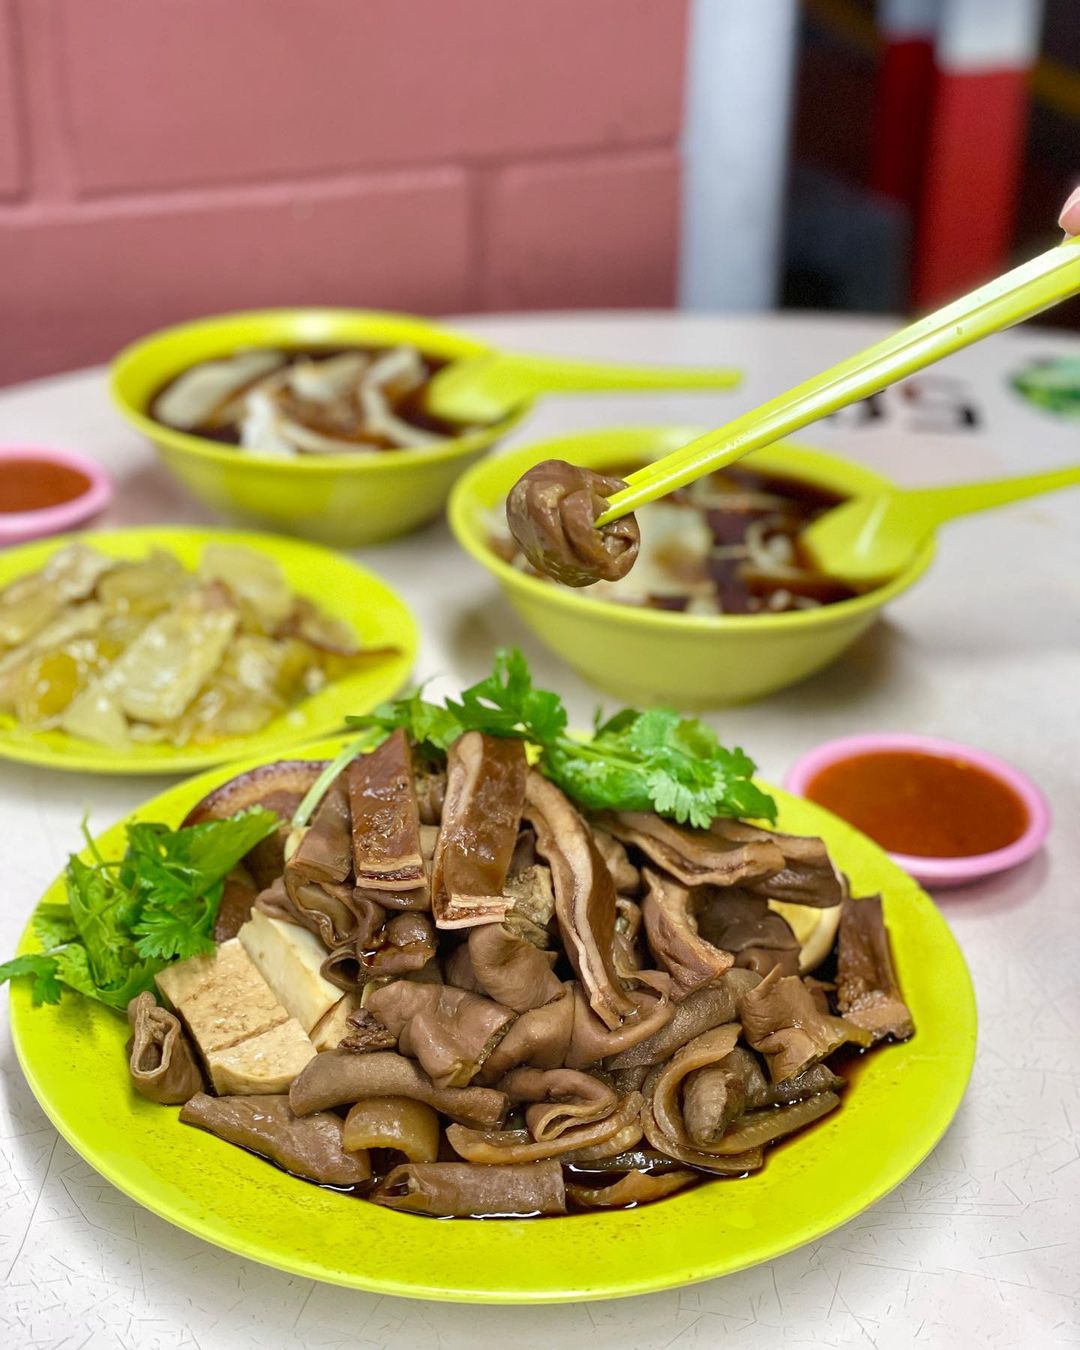 hawker dishes in Singapore - 284 koay chap